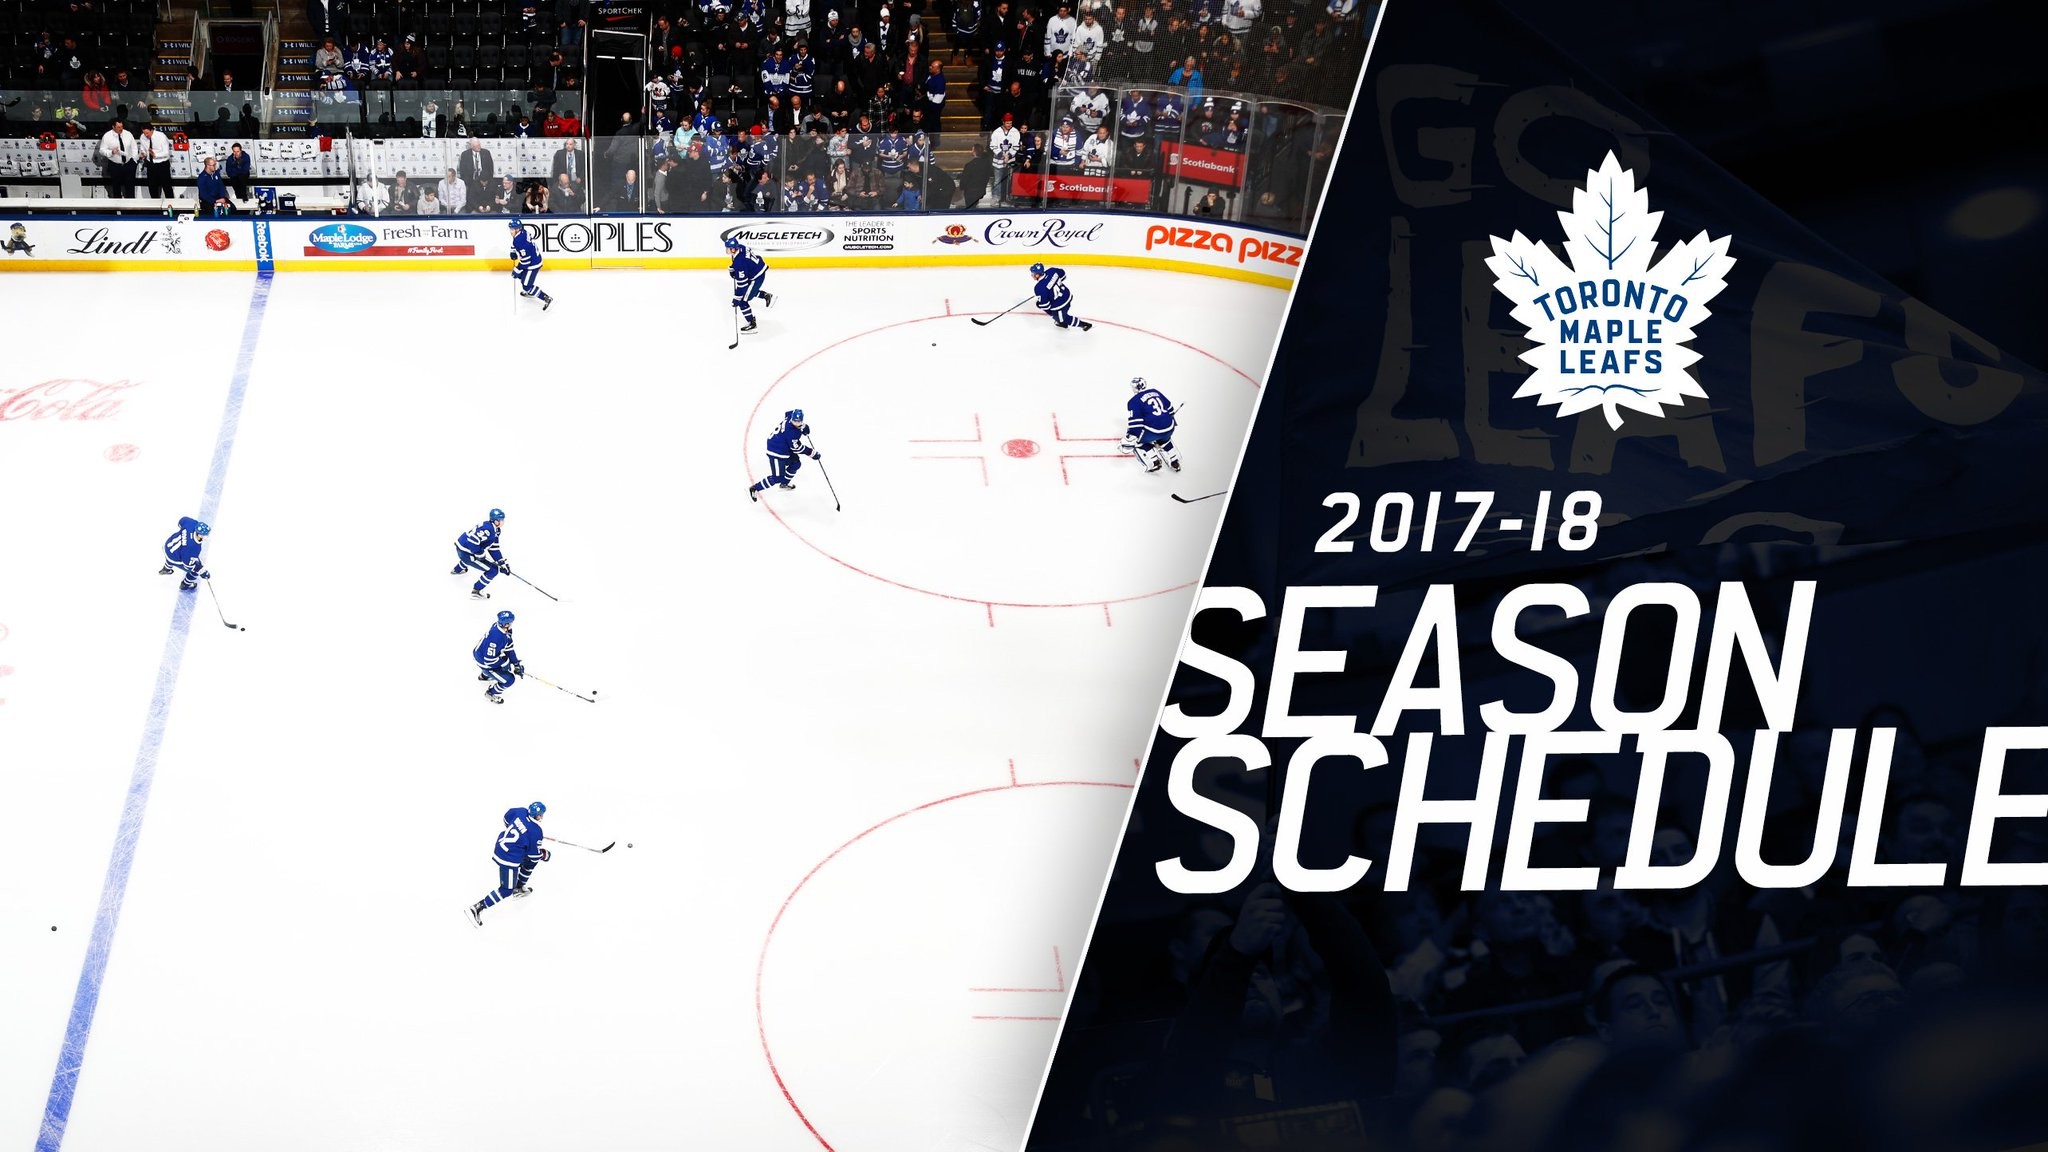 2048x1152 Toronto Maple Leafs on Twitter: "Mark your calendar. The 2017-18 @MapleLeafs  schedule is here. SCHEDULE â¡ https://t.co/OddwuQSNh6  https://t.co/RxX9djIw86"